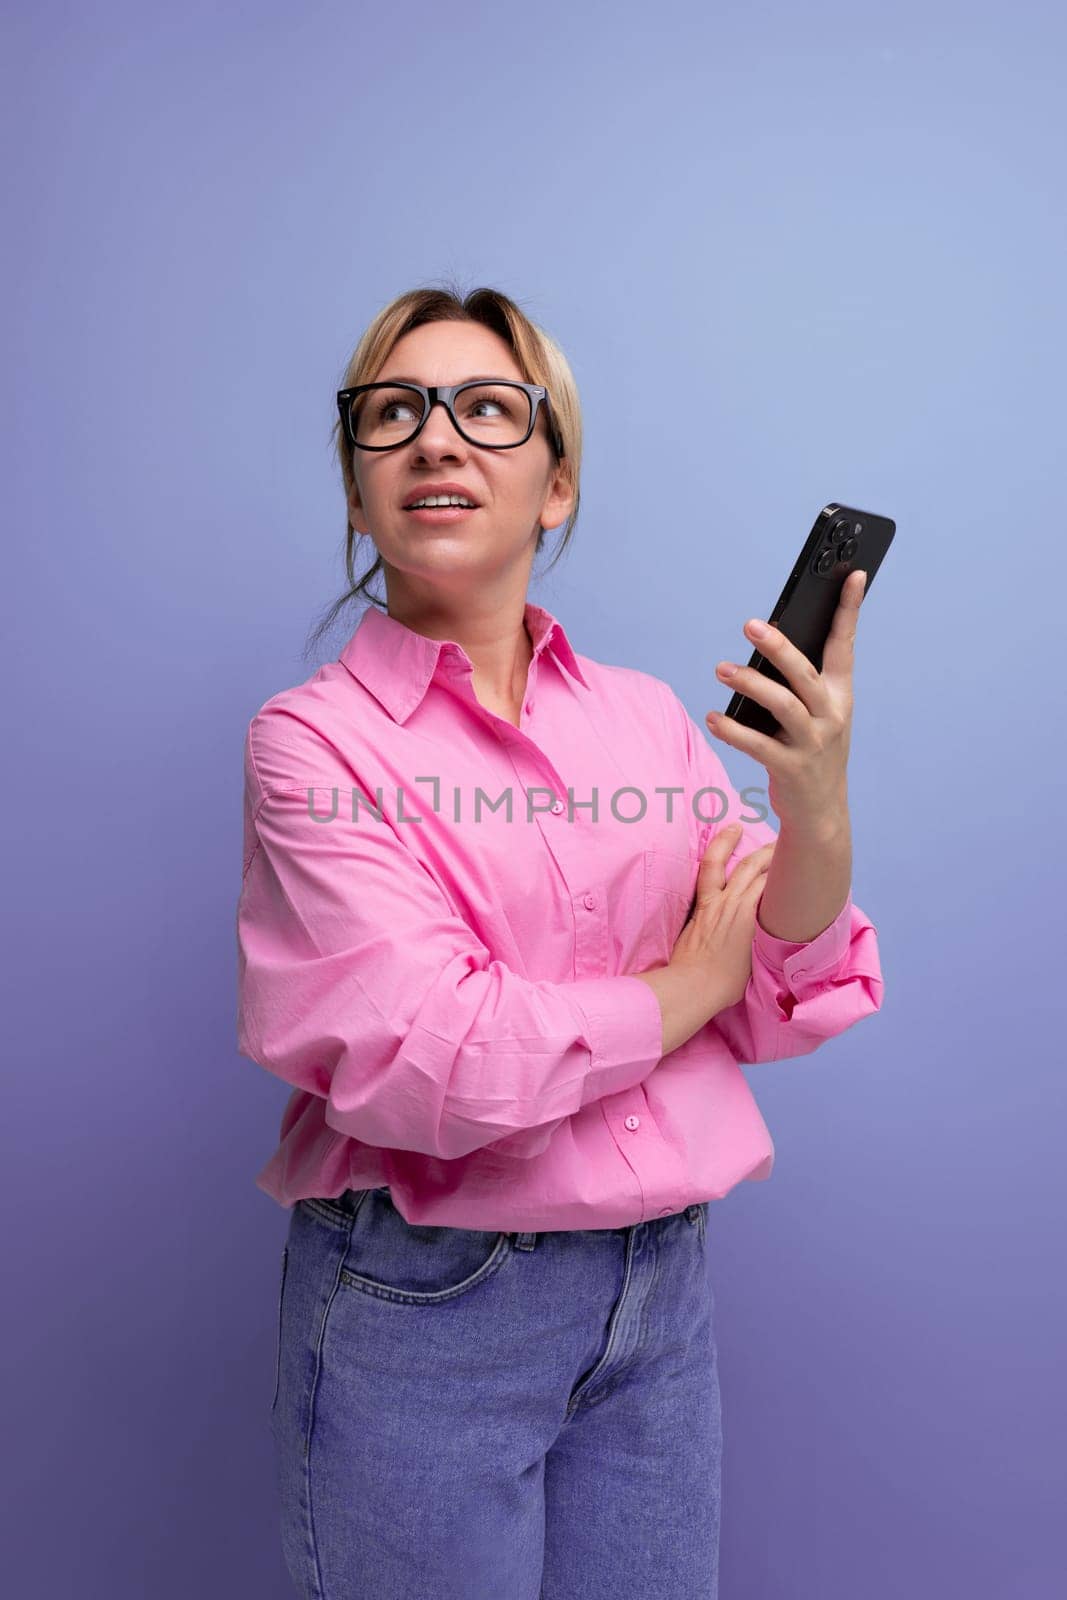 young confident blond woman with ponytail and glasses dressed in a fashionable pink shirt for the office solves work issues on the phone.